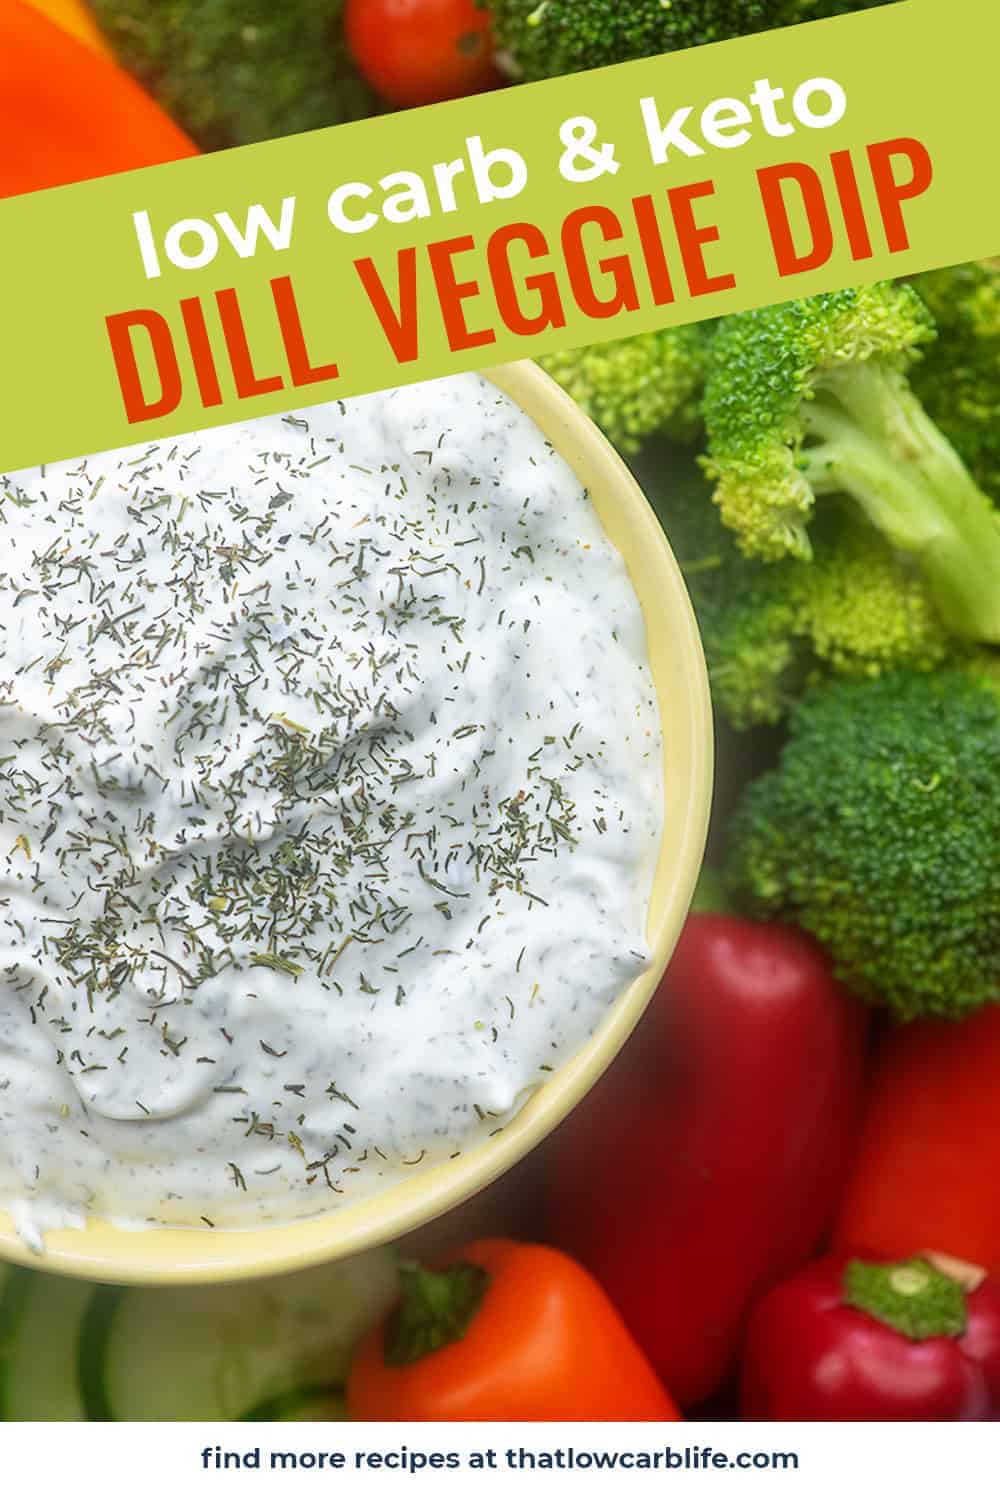 A bowl of dill veggie dip next to tomatoes and broccoli.